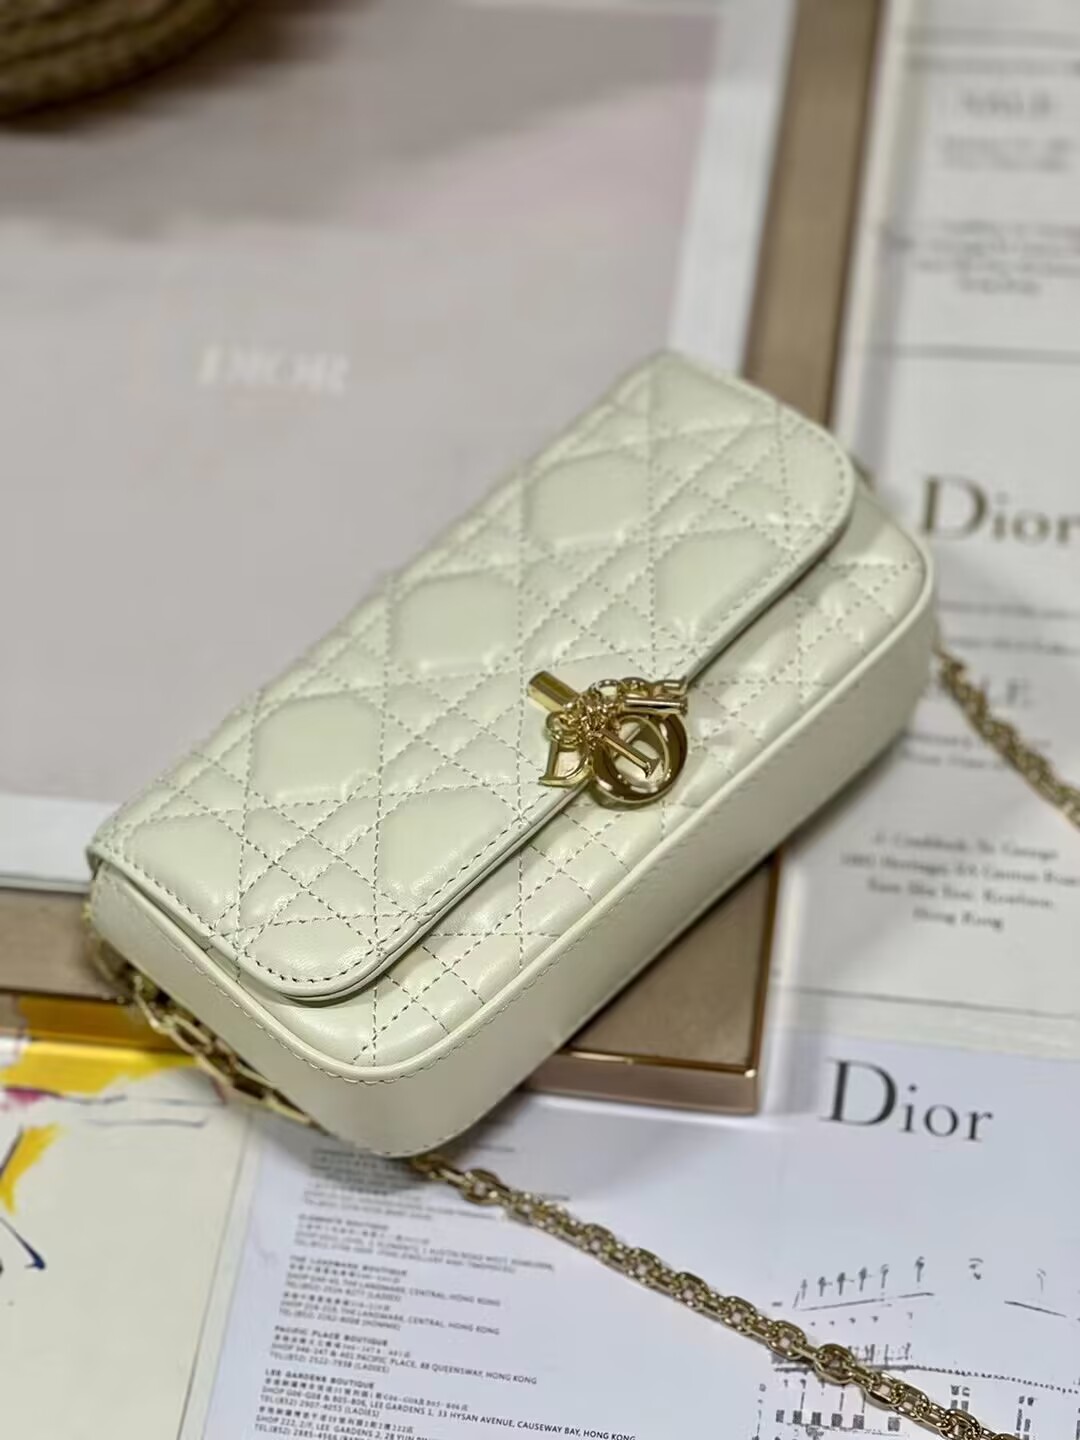 LADY DIOR PHONE POUCH Aesthetic Cannage Lambskin S0977ONM white